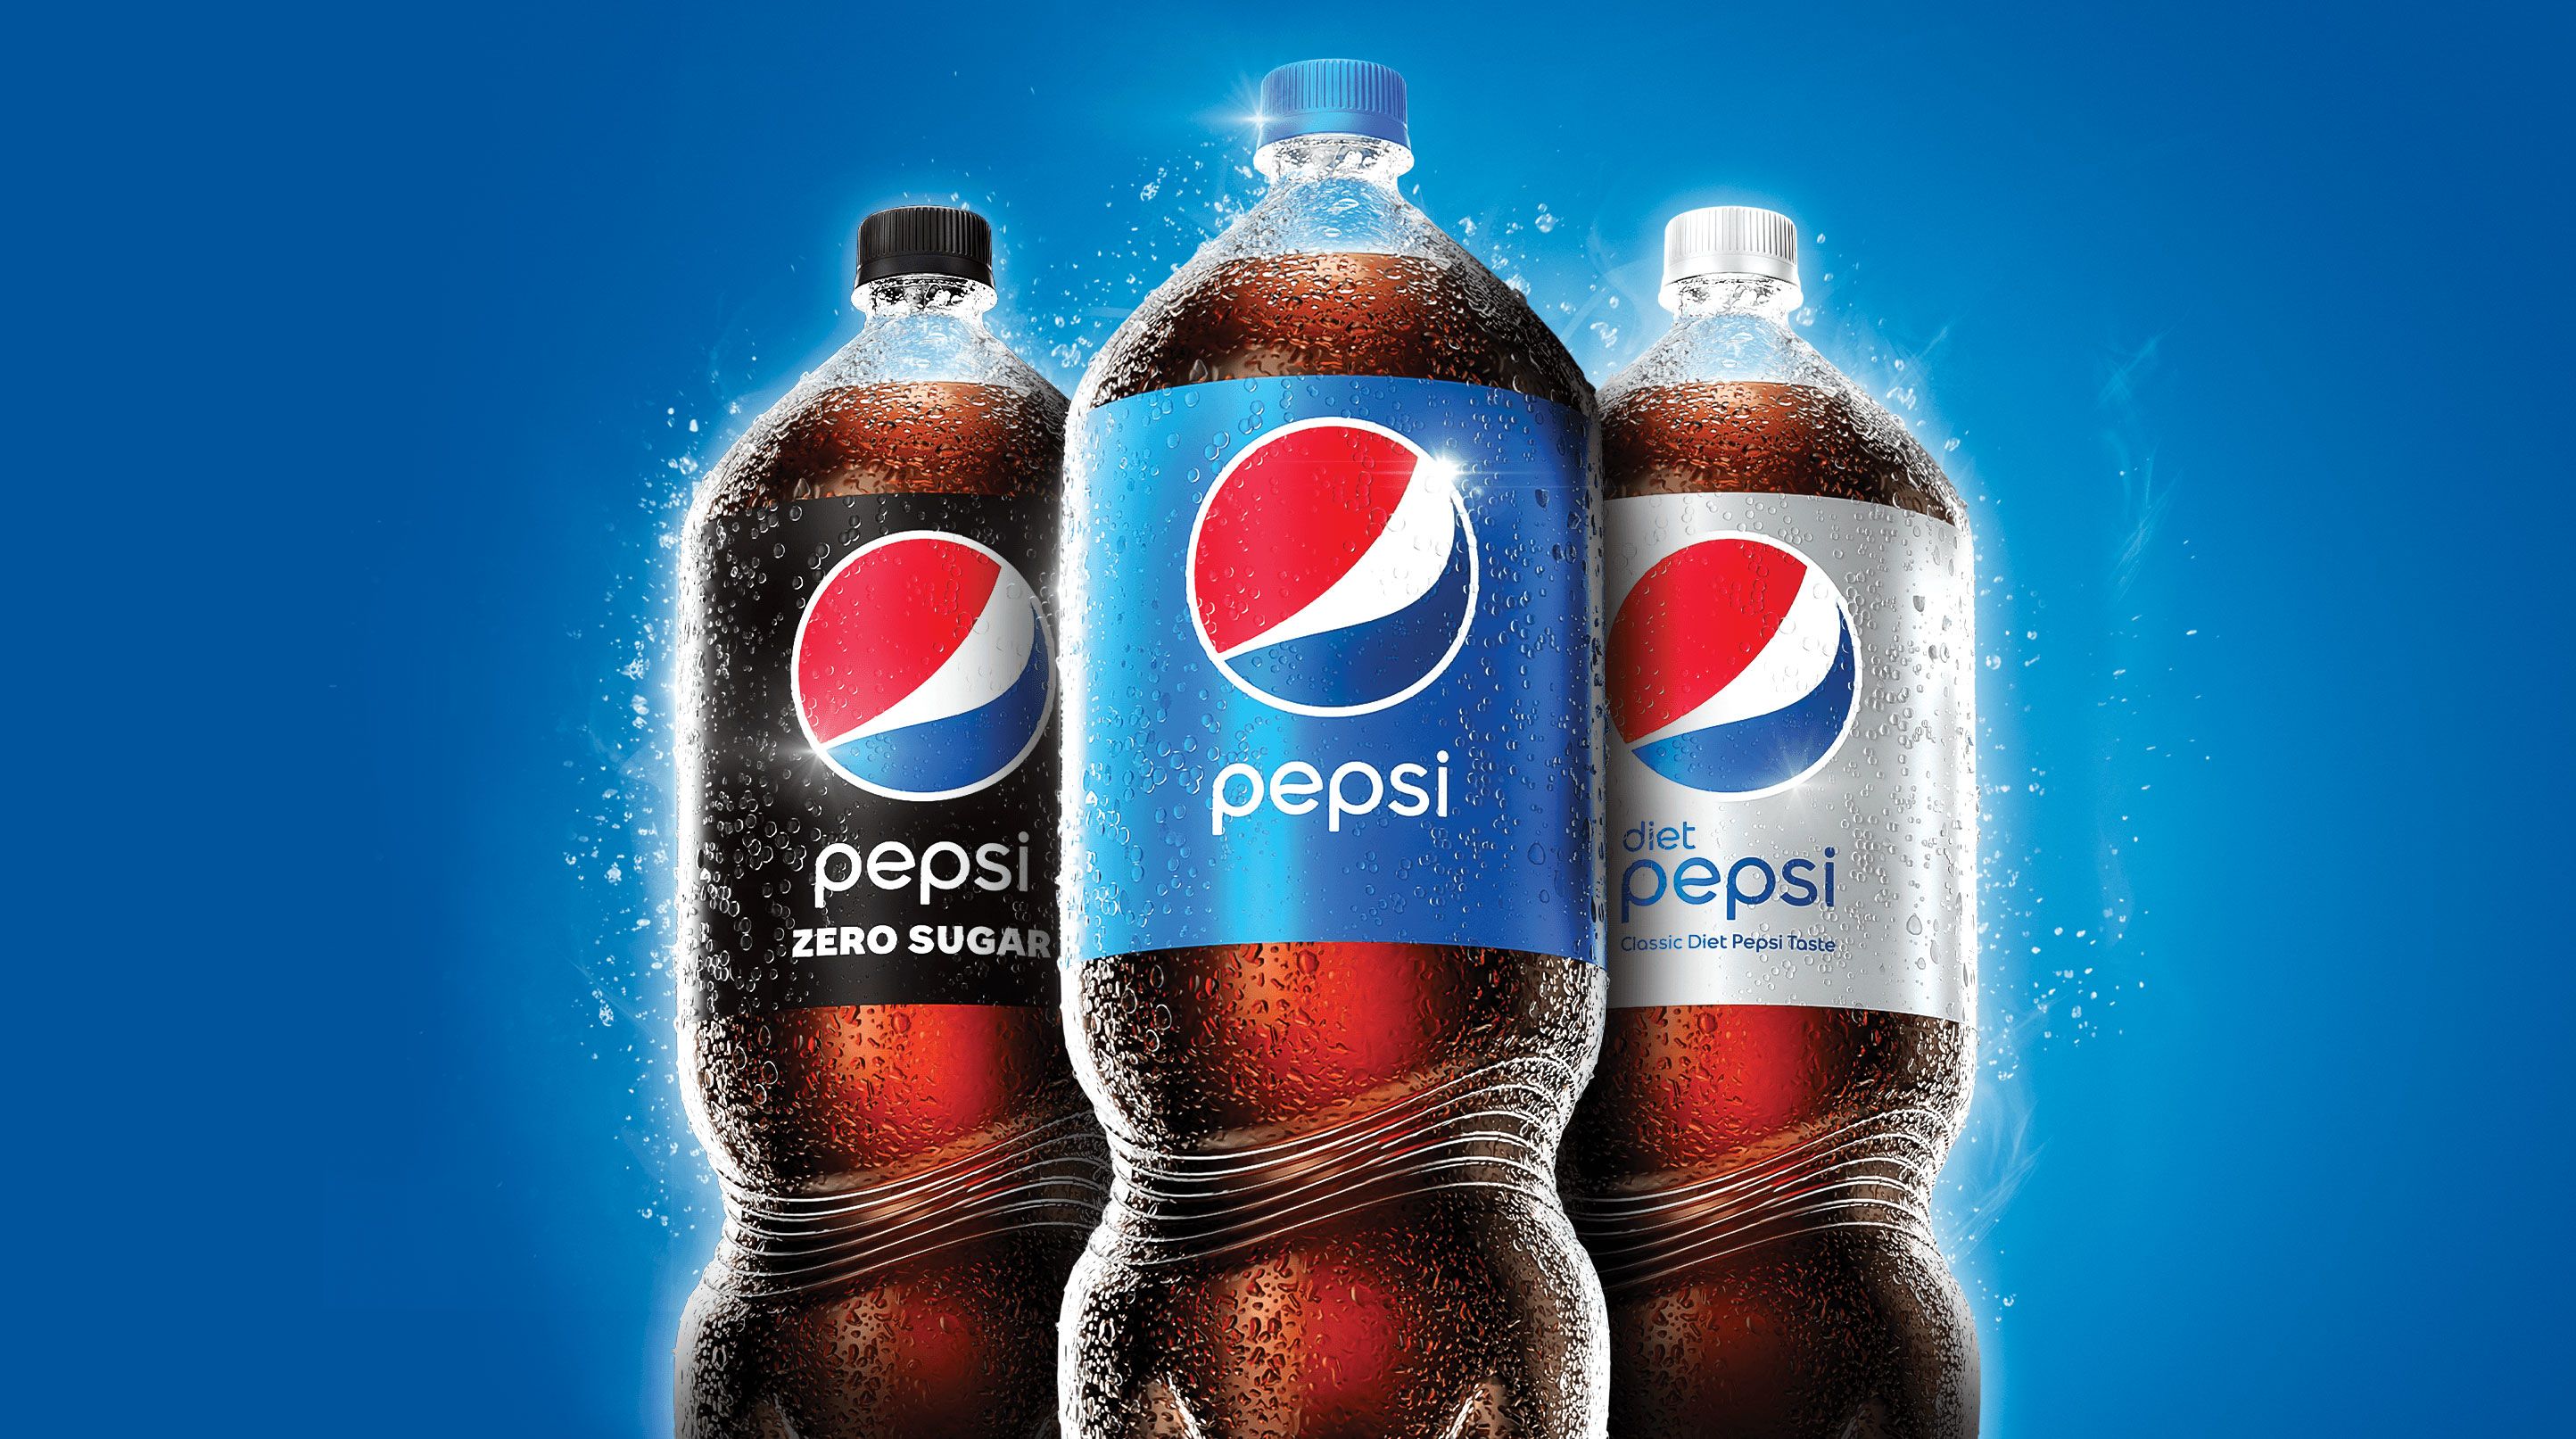 years 30 | bottle 2-liter redesign in nearly first unveils CNN Pepsi Business